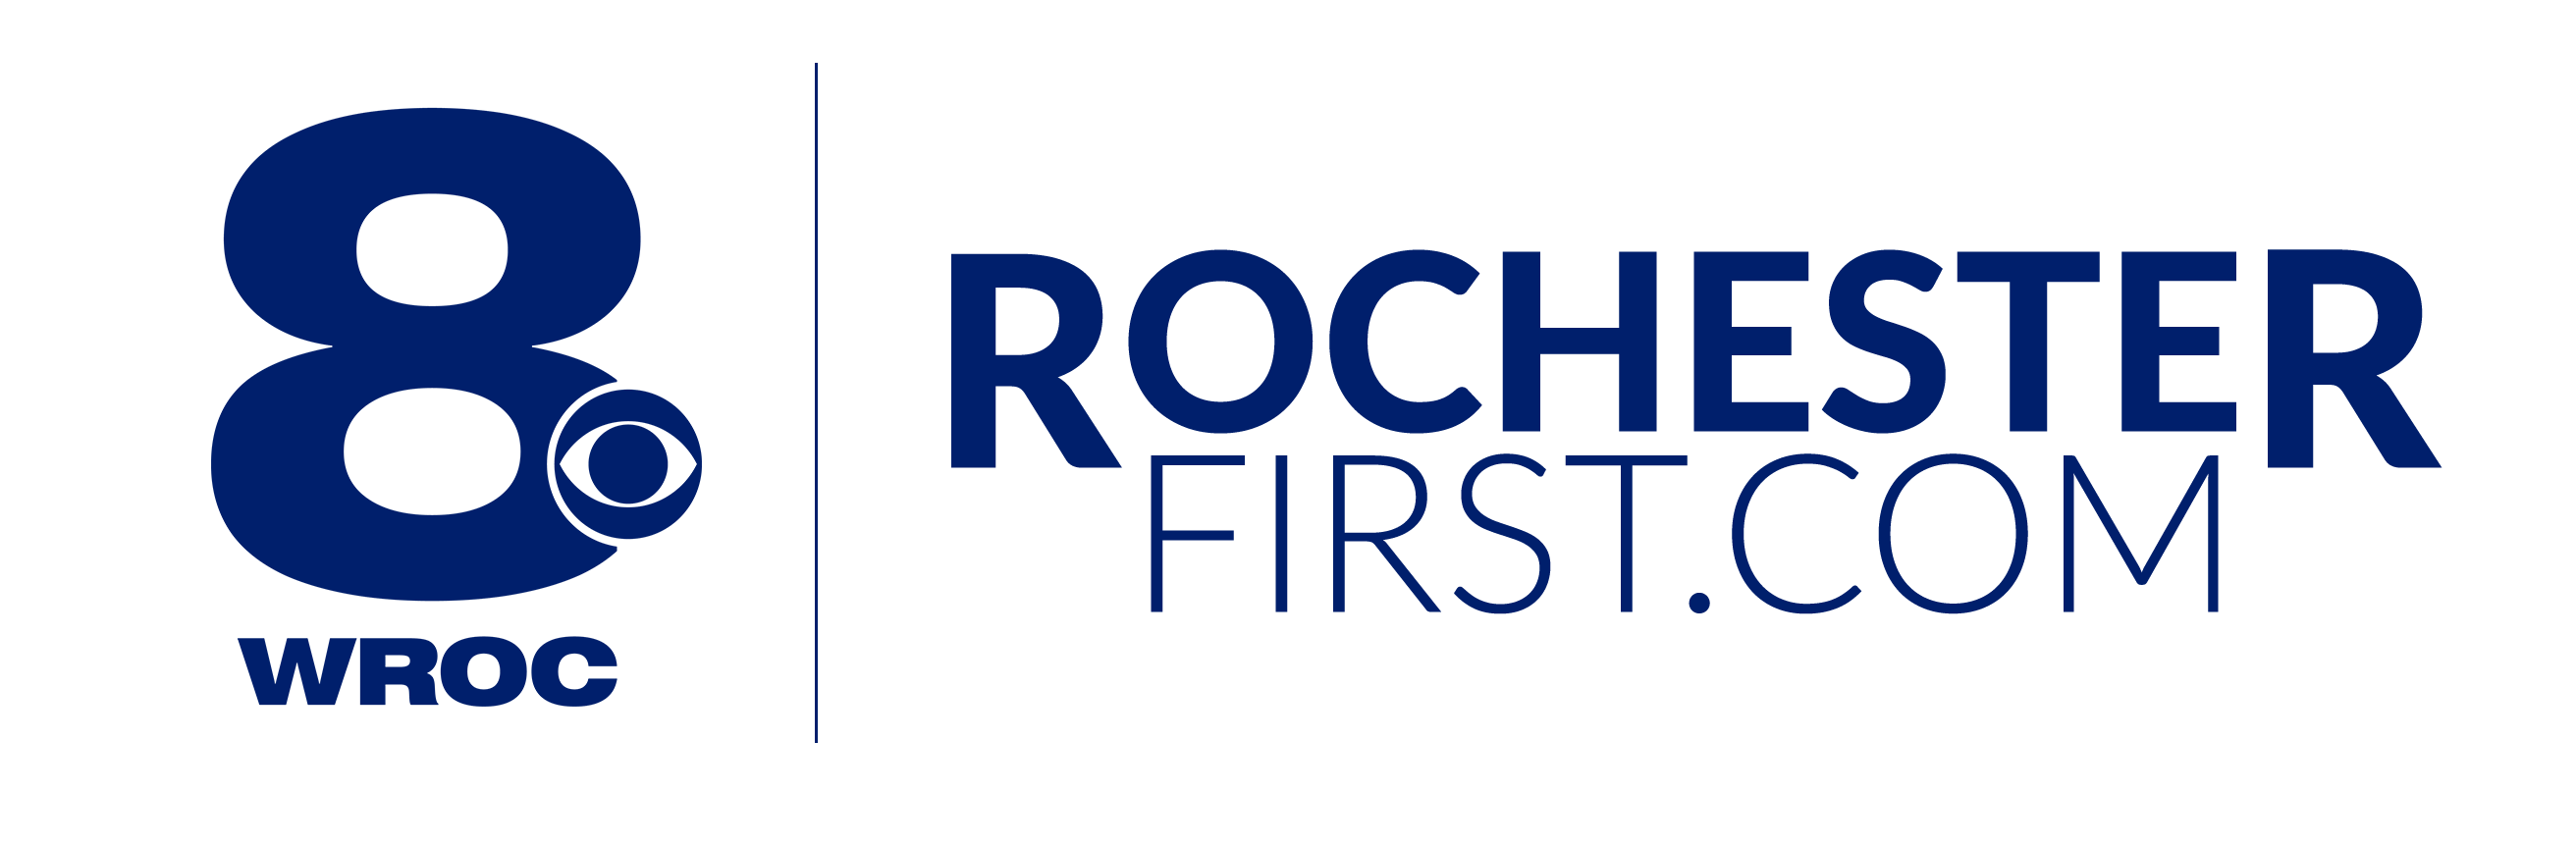 WROC Channel 8 Rochester First